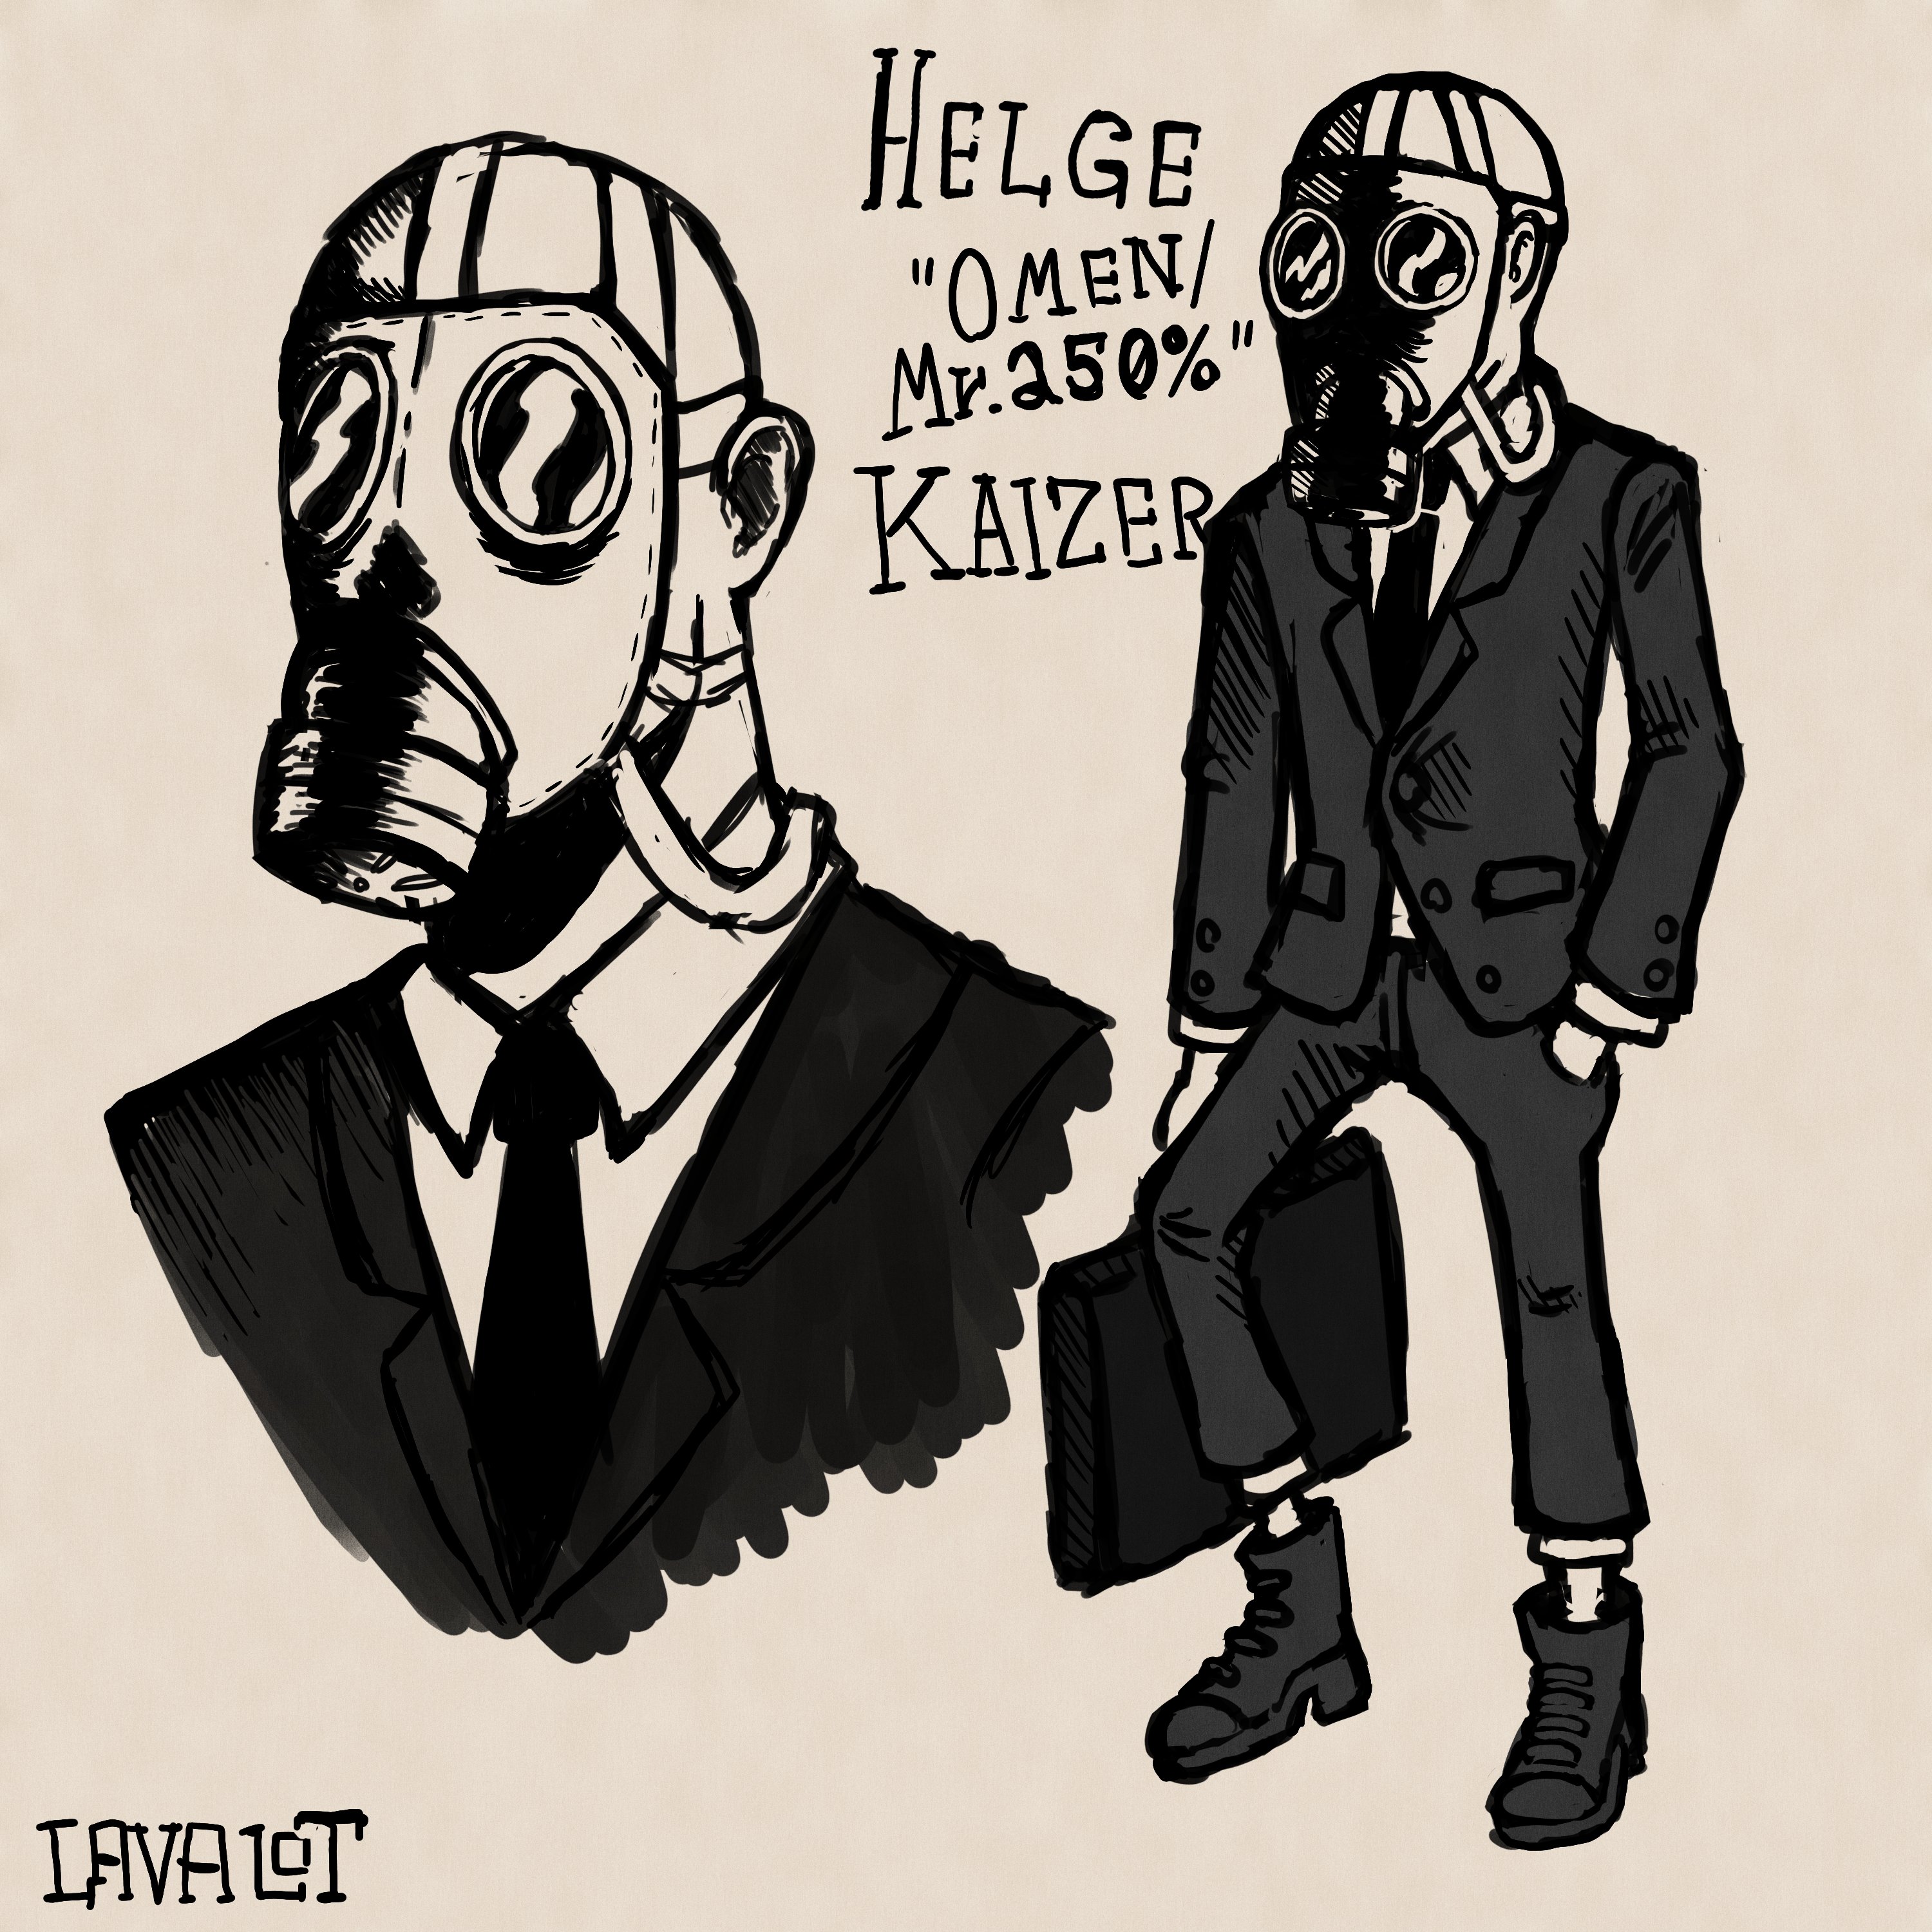 News about Kaizers on Twitter: "RT @lava1o: Drew fanart of Helge aka. Mr. 250% or Omen, from one of my all favorite bands Kaizers Orchestra. Probably the most ic…" Twitter